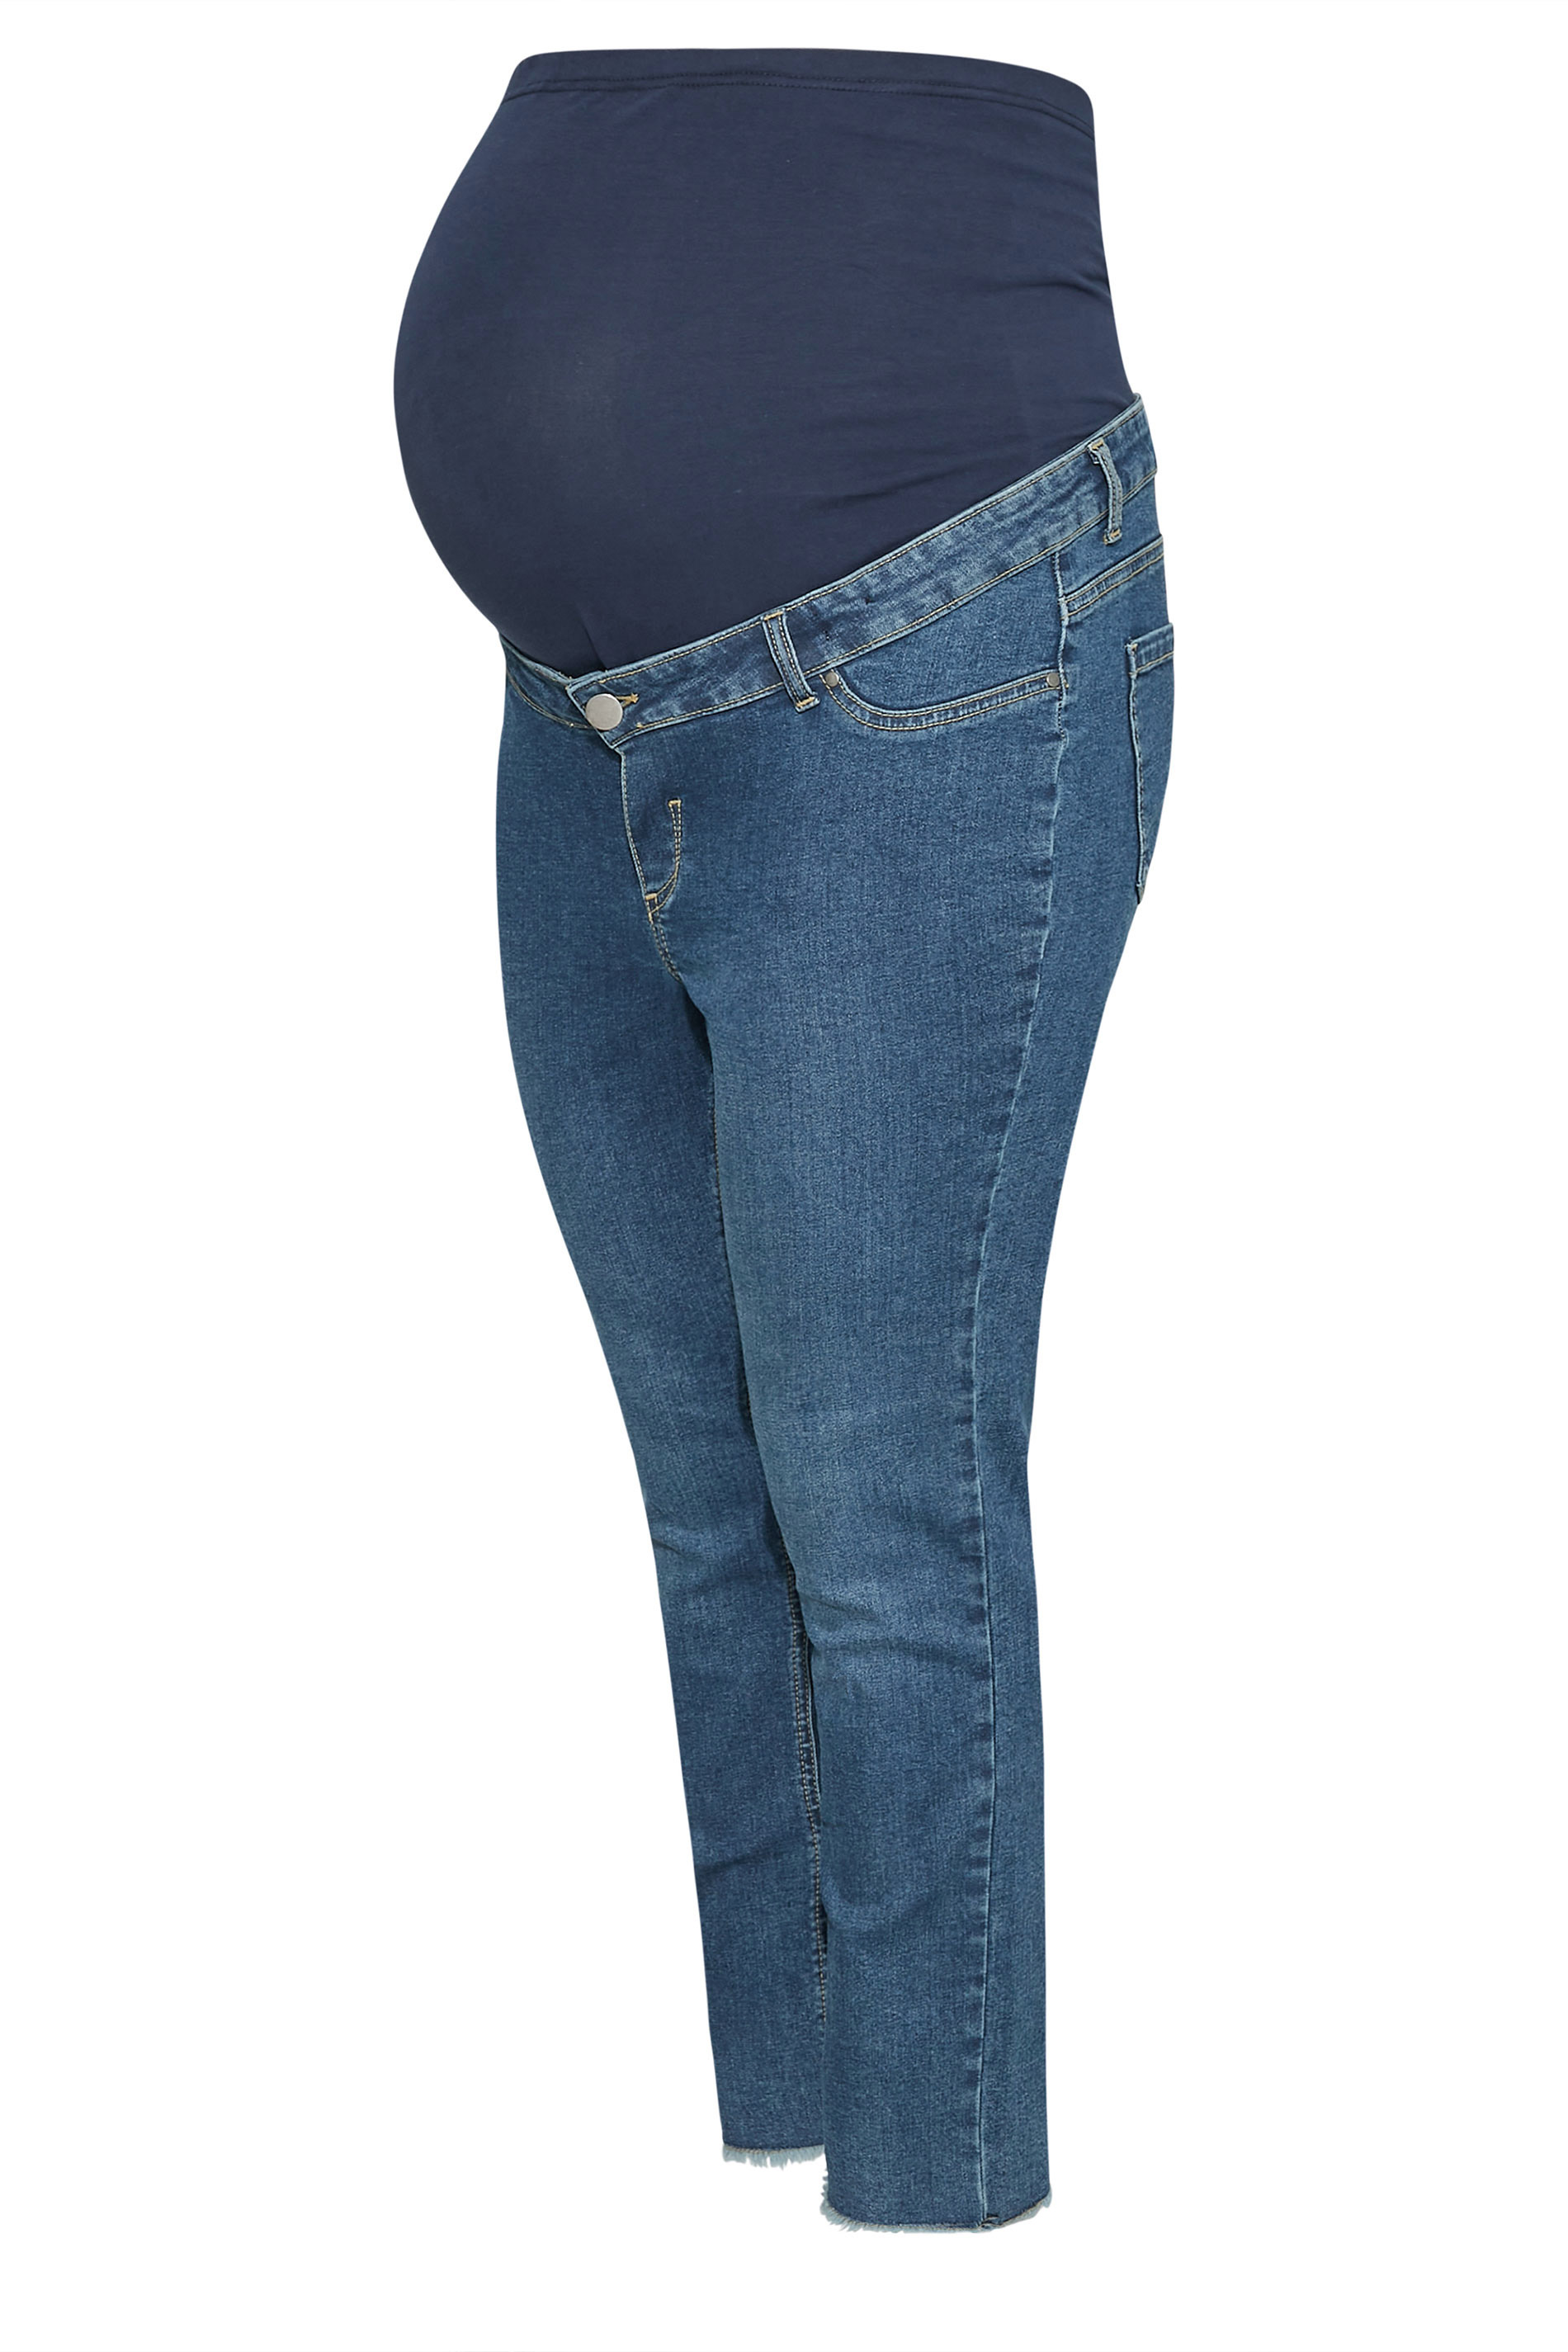 BUMP IT UP MATERNITY Plus Size Blue Mom Jeans | Yours Clothing